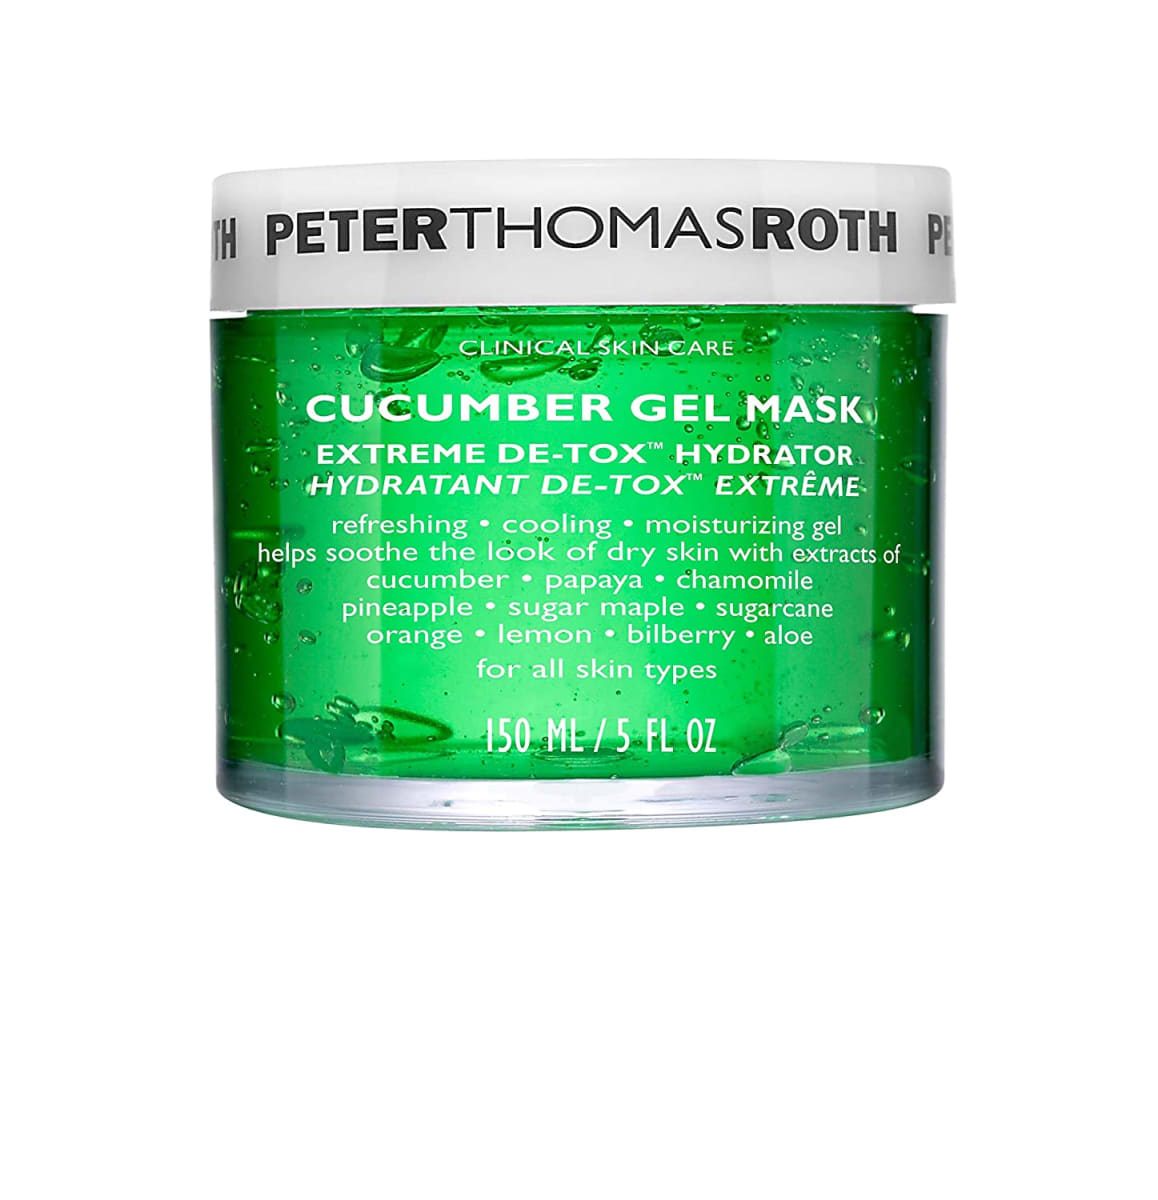 Peter Thomas Roth | Cucumber Gel Mask | Extreme De-Tox Hydrator, Cooling and Hydrating Facial Mask, Helps Soothe the Look of Dry and Irritated Skin